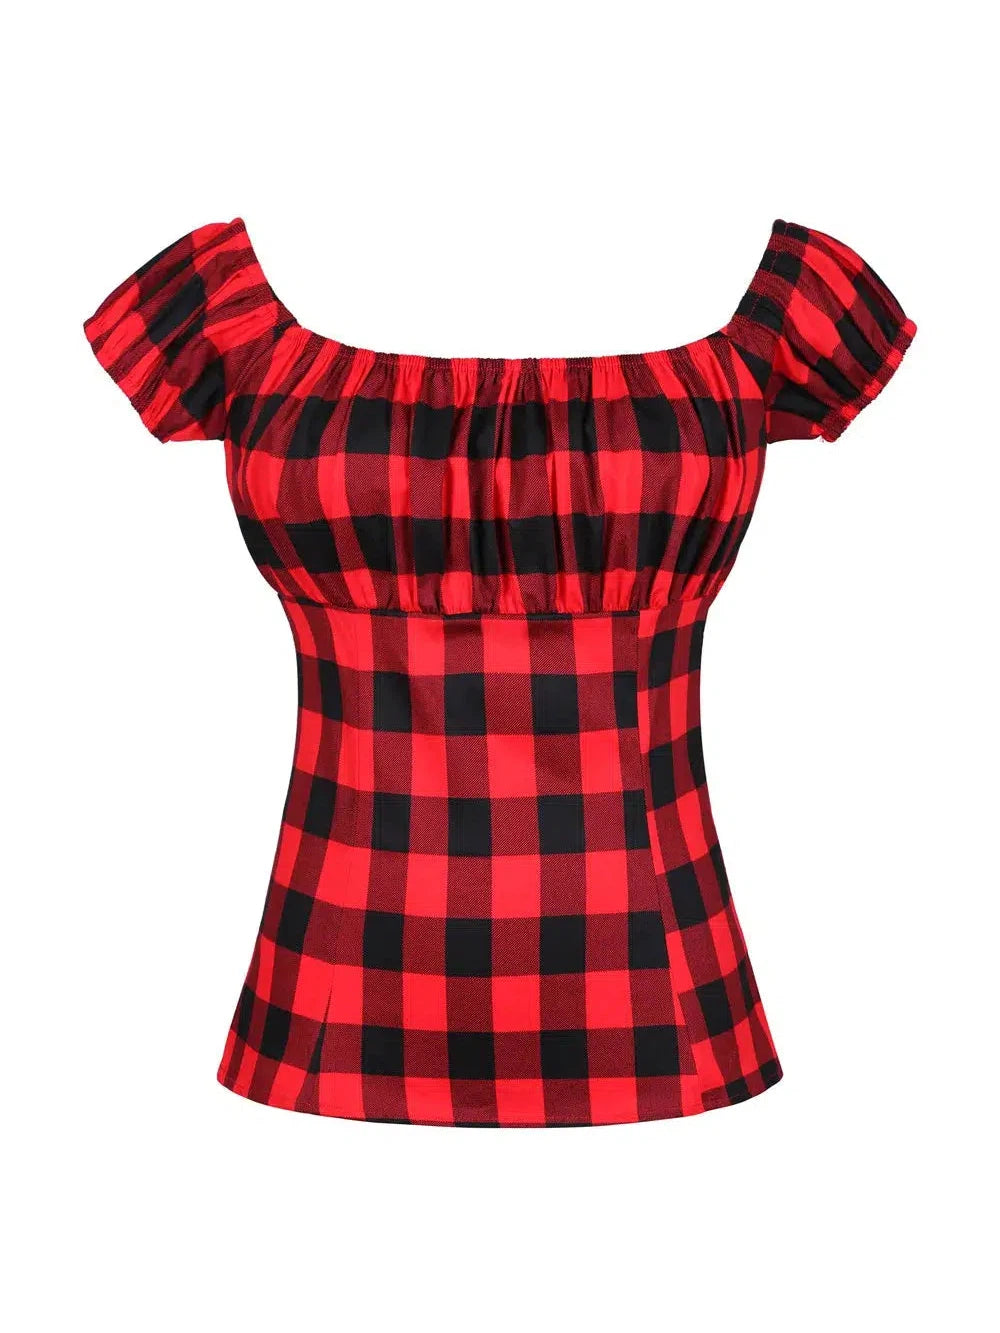 Red Plaid Peasant Style Top